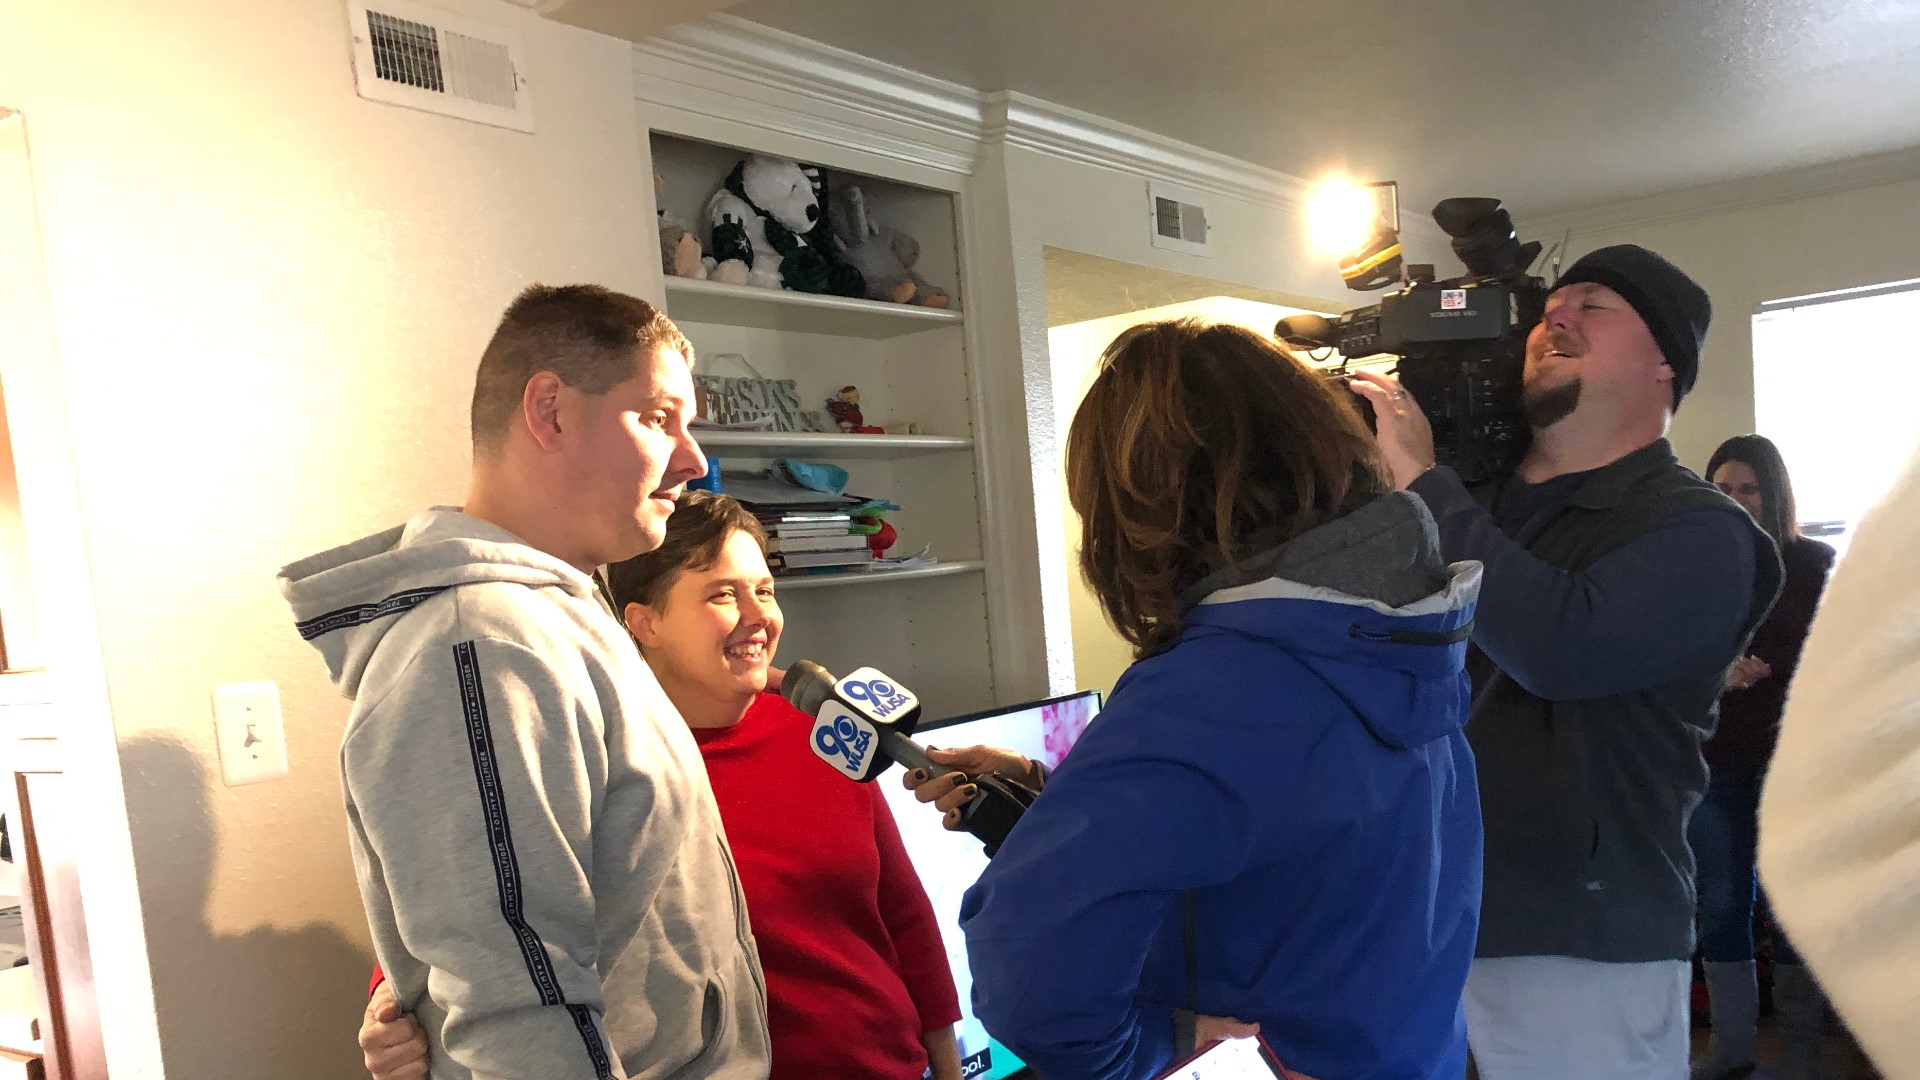 The Brewers lost everything to mold this year not just once, but twice.  The community decided to surprise this mom of six with a new home for the holidays.